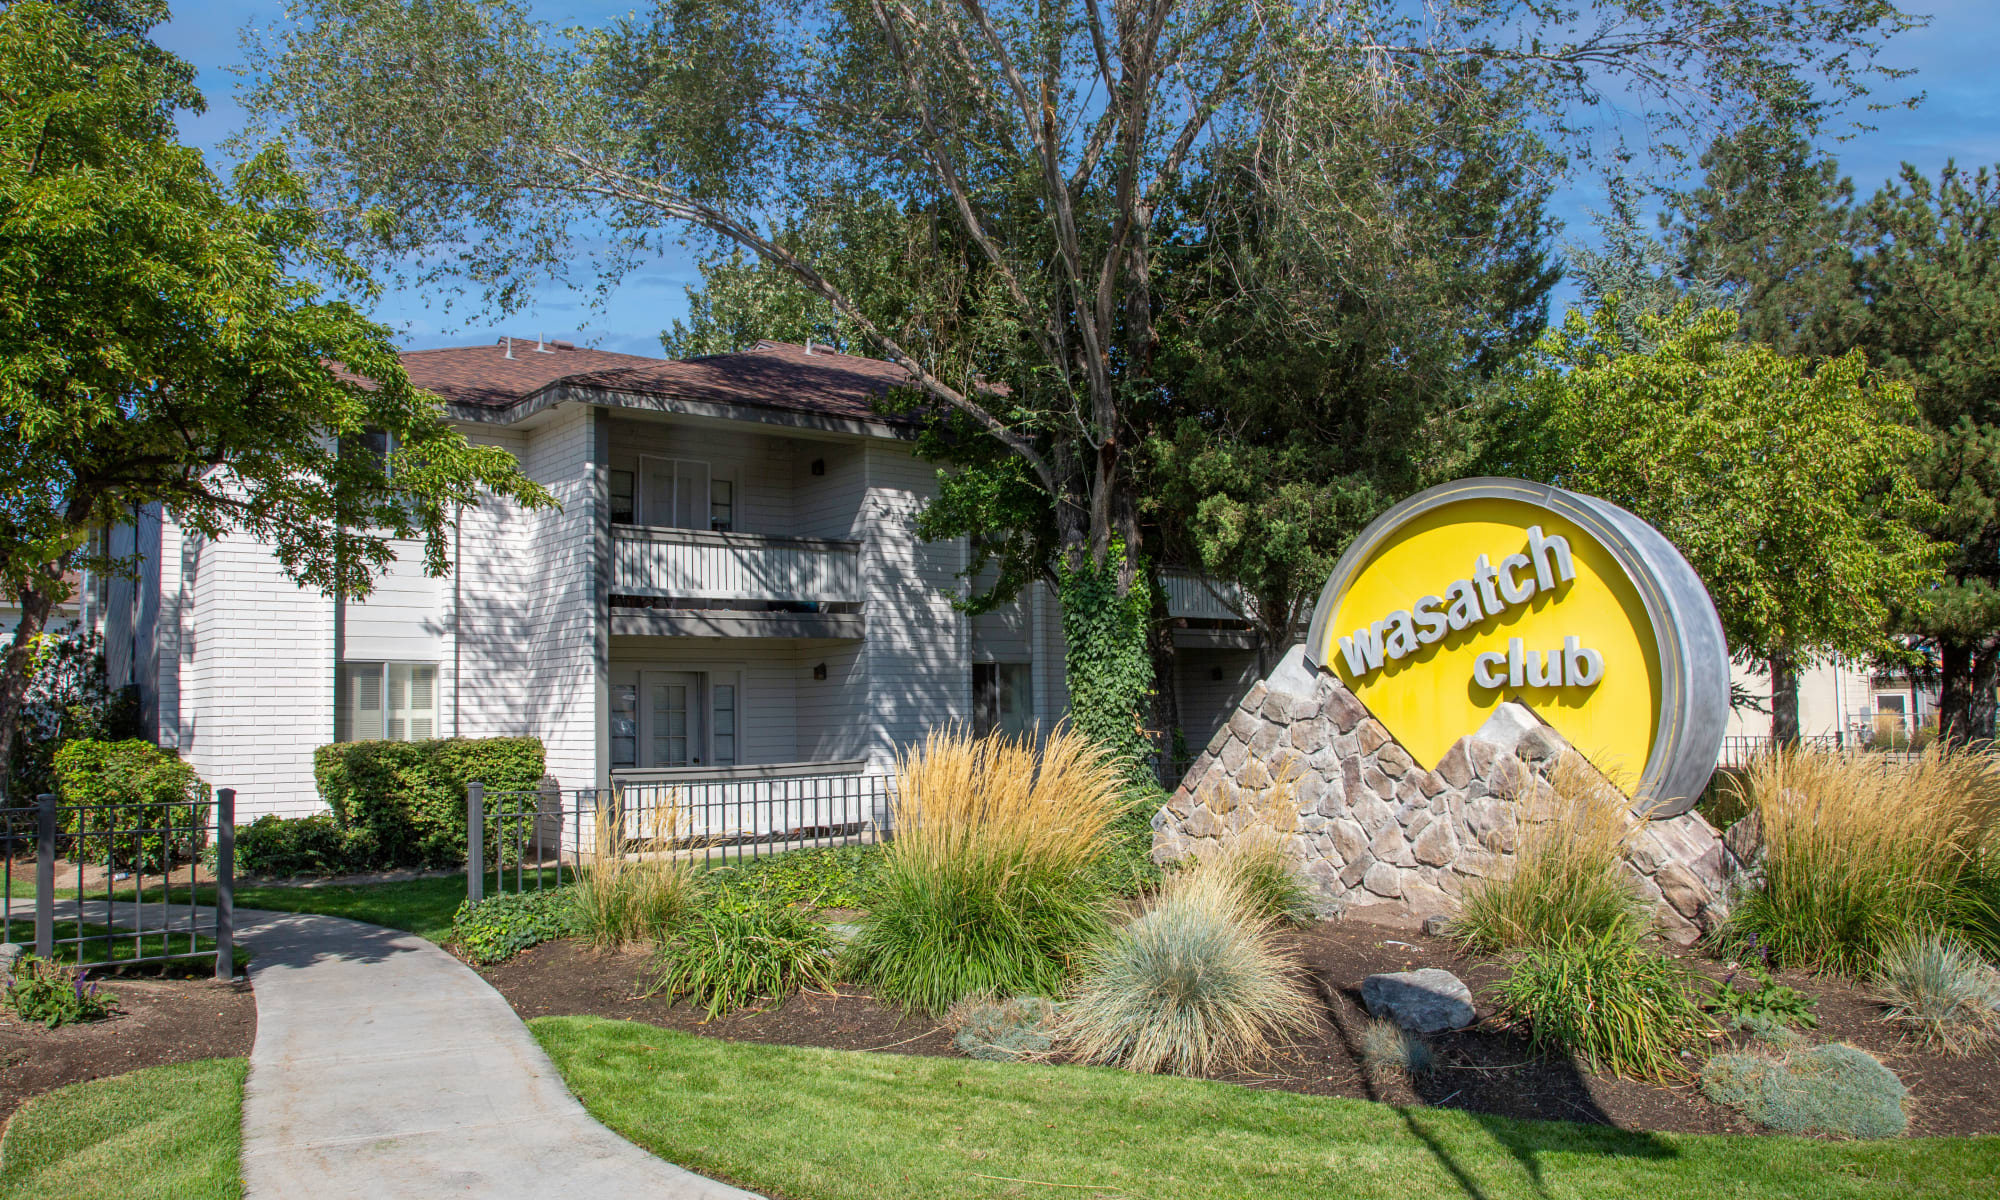 Resident services at Wasatch Club Apartments in Midvale, Utah